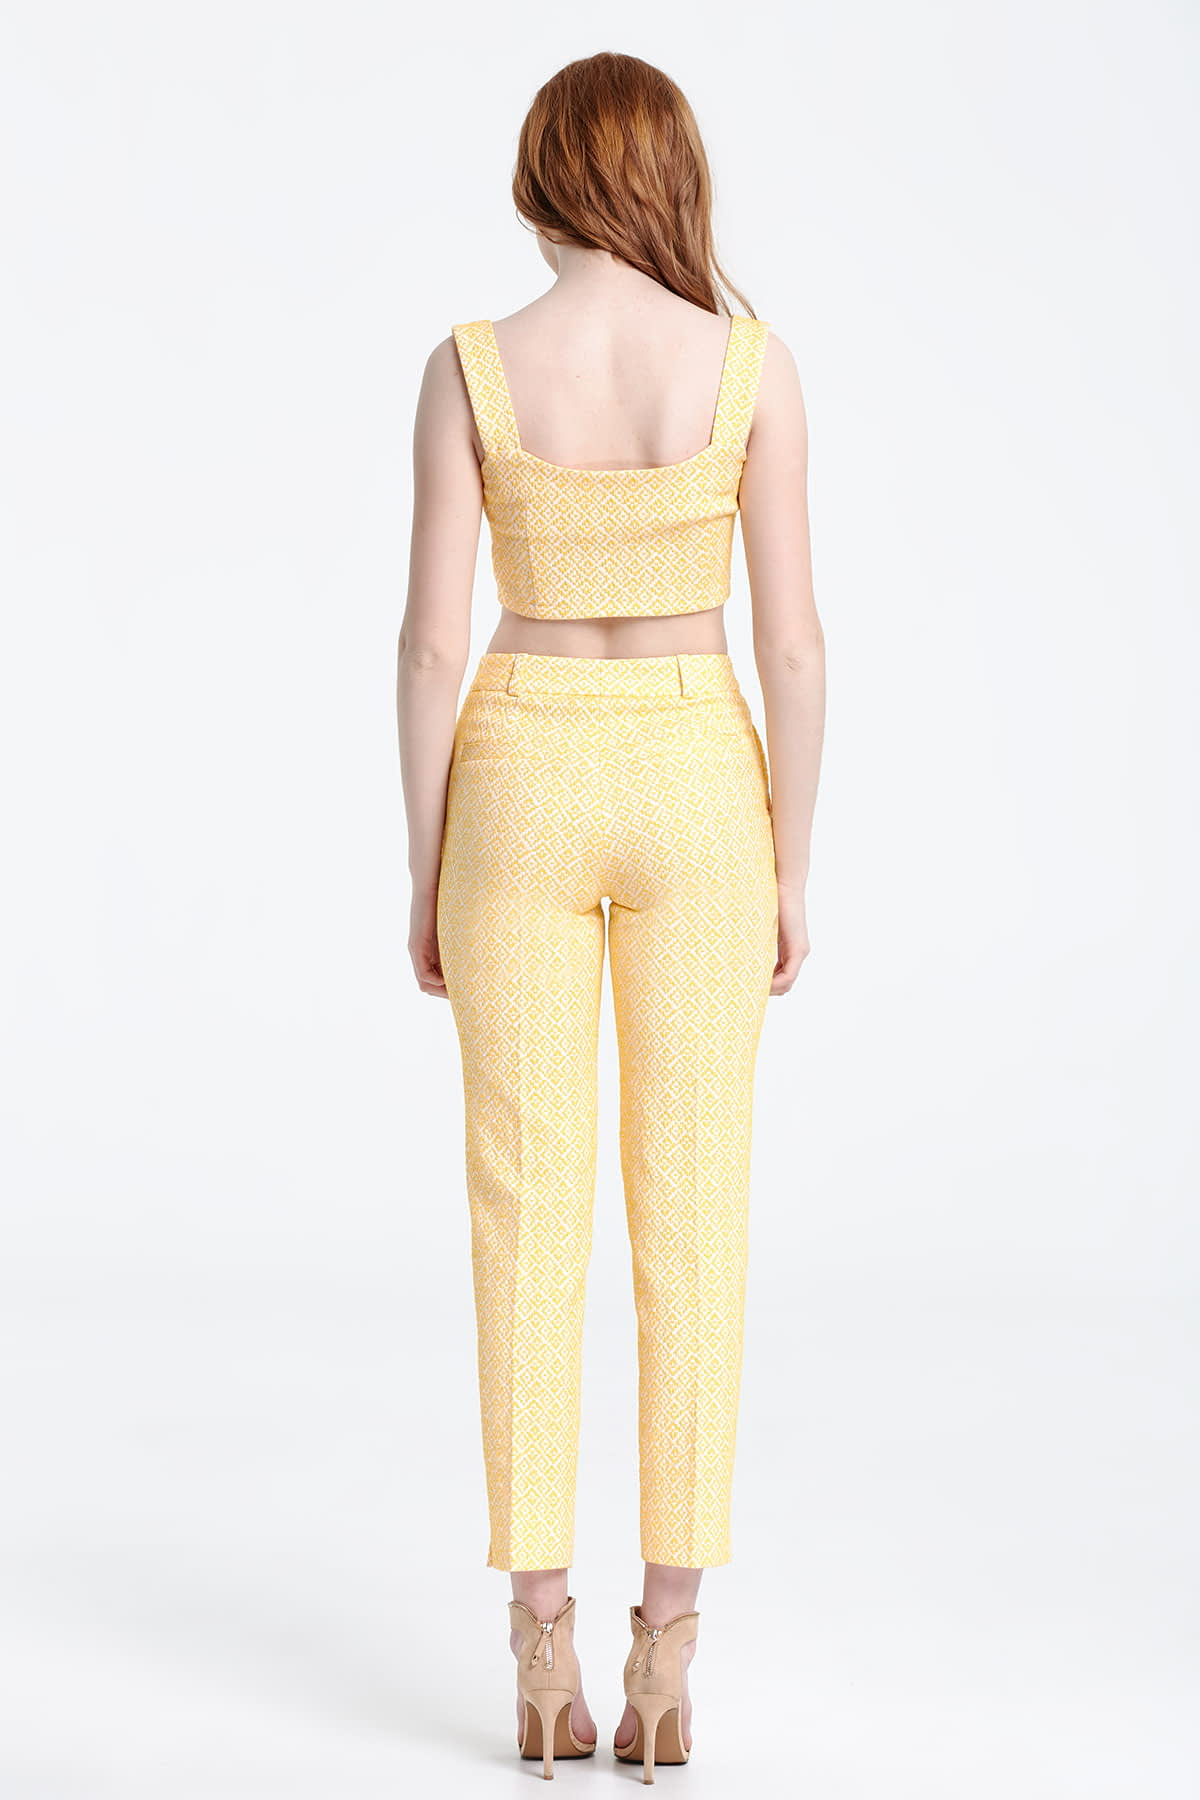 Short trousers with a yellow pattern , photo 4